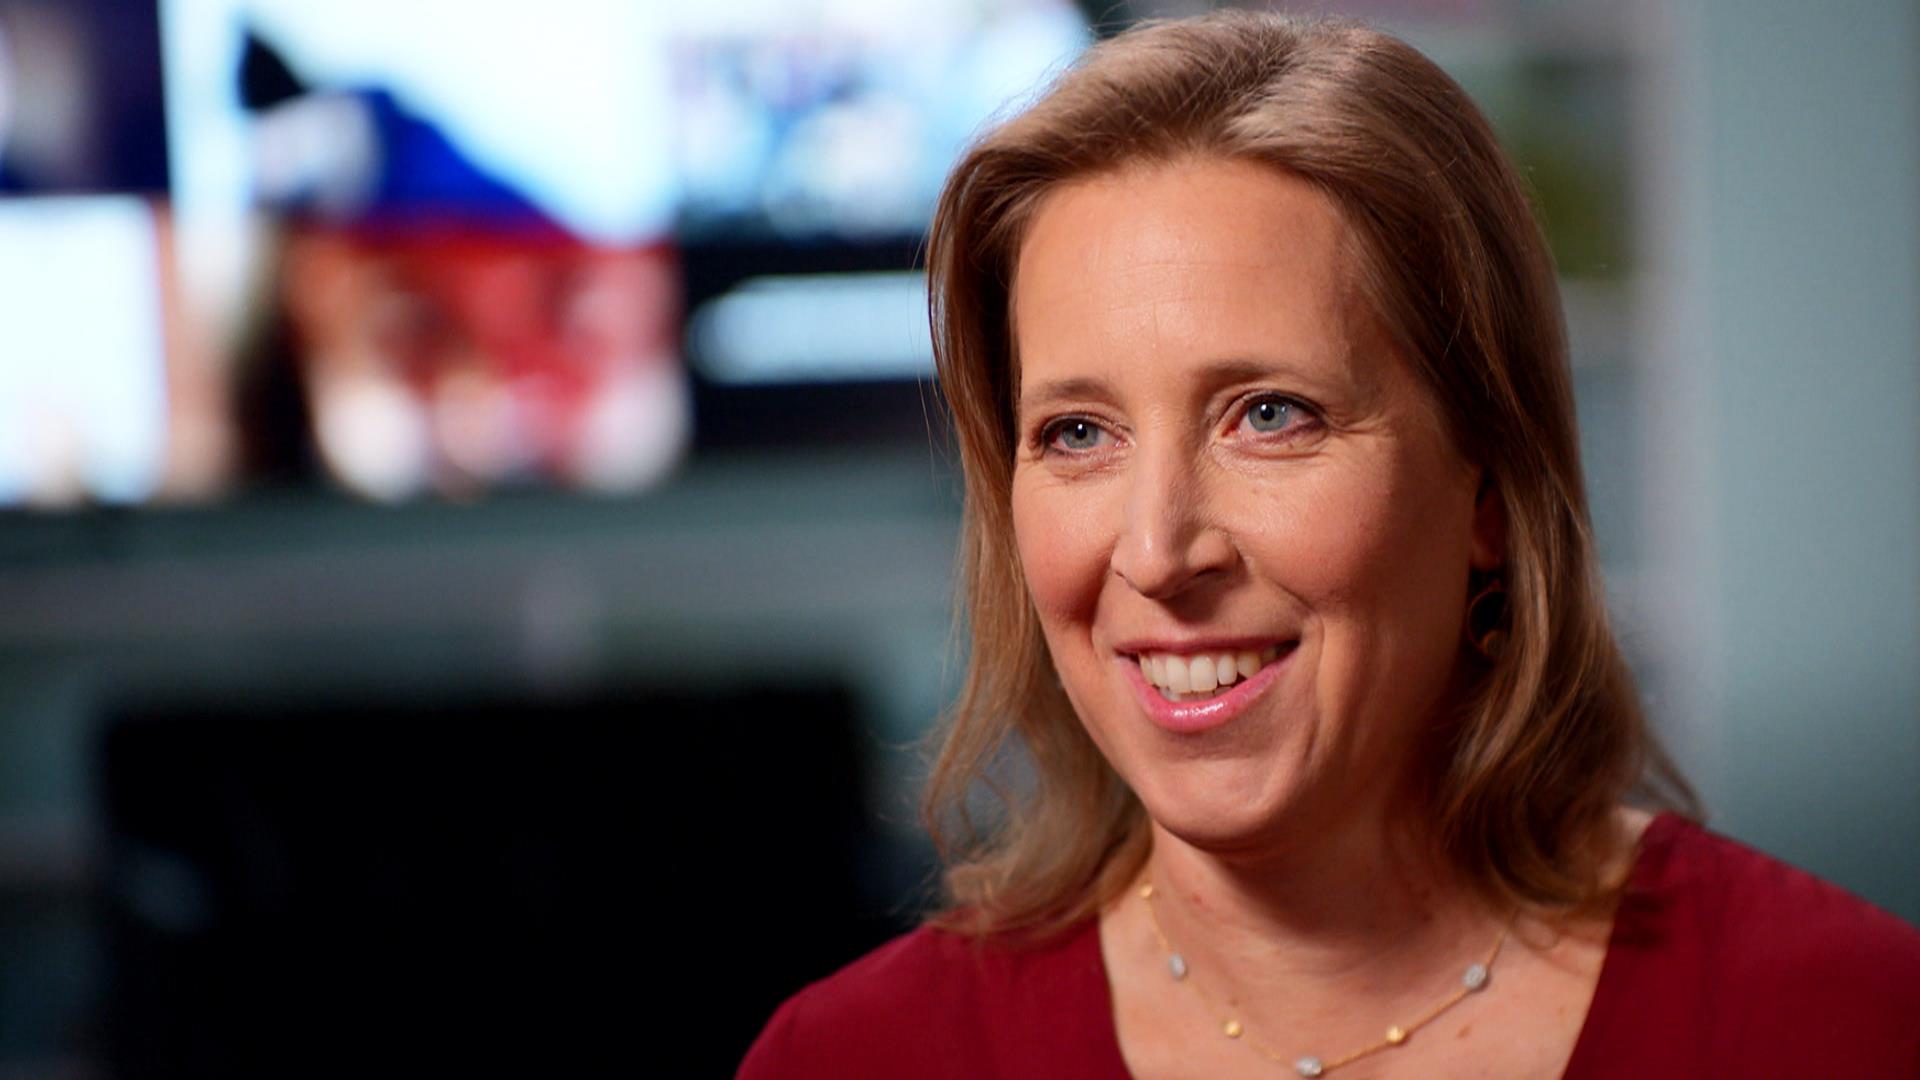 YouTube CEO Susan Wojcicki on how the platform is working to combat online ...